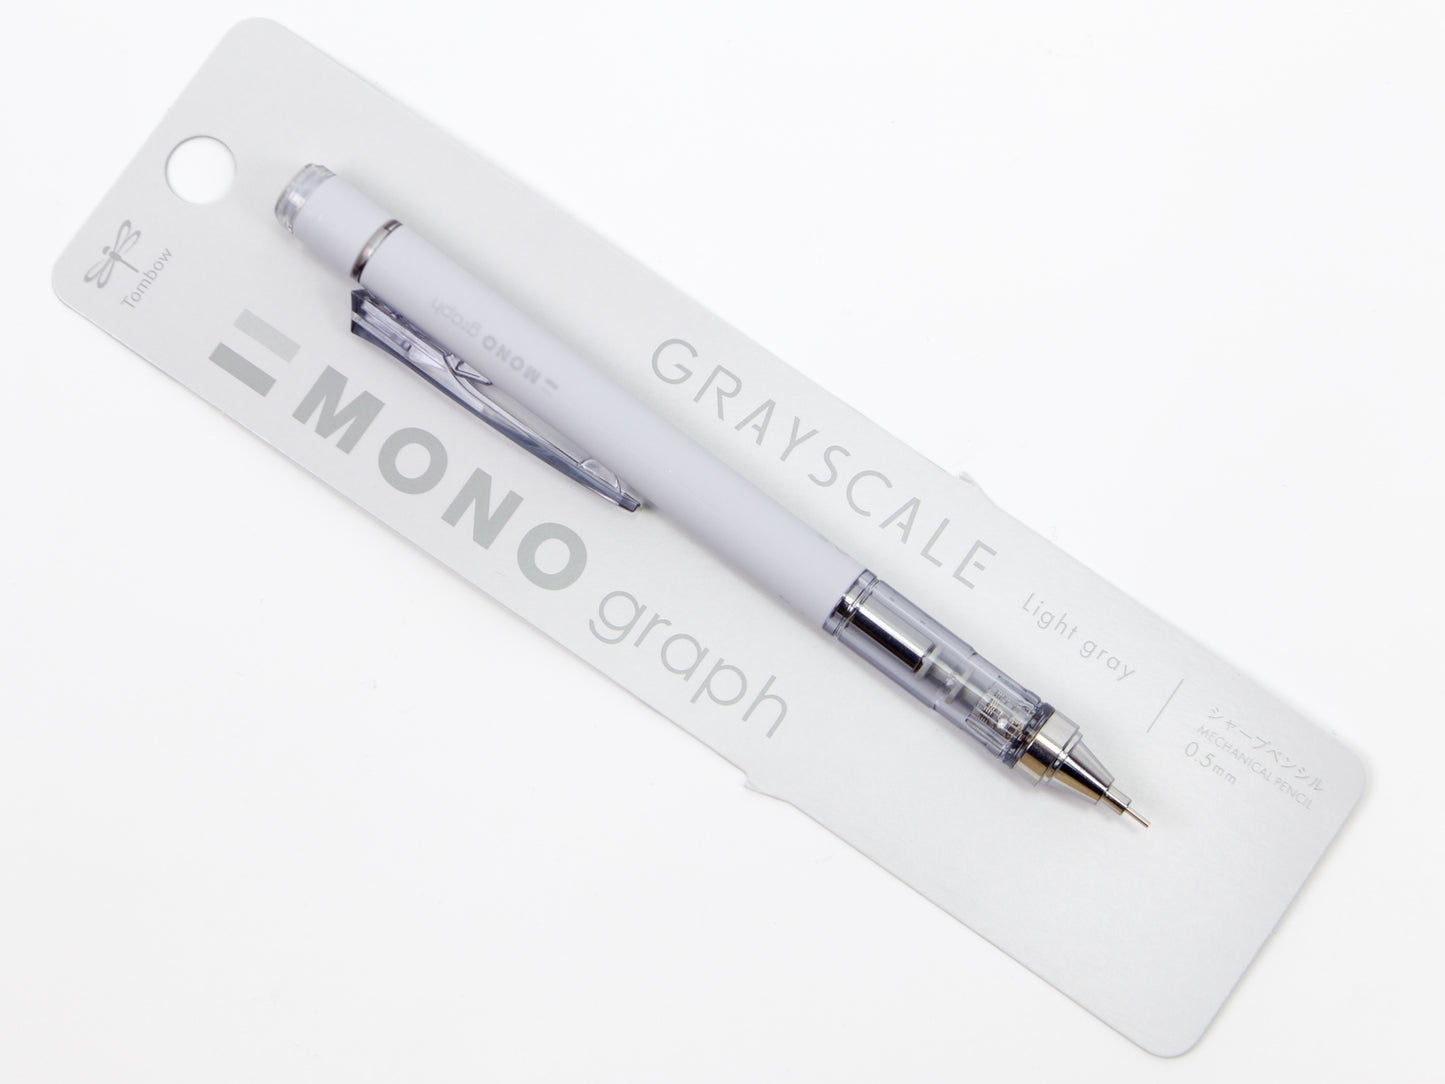 Tombow Mono Graph Grayscale Limited Edition